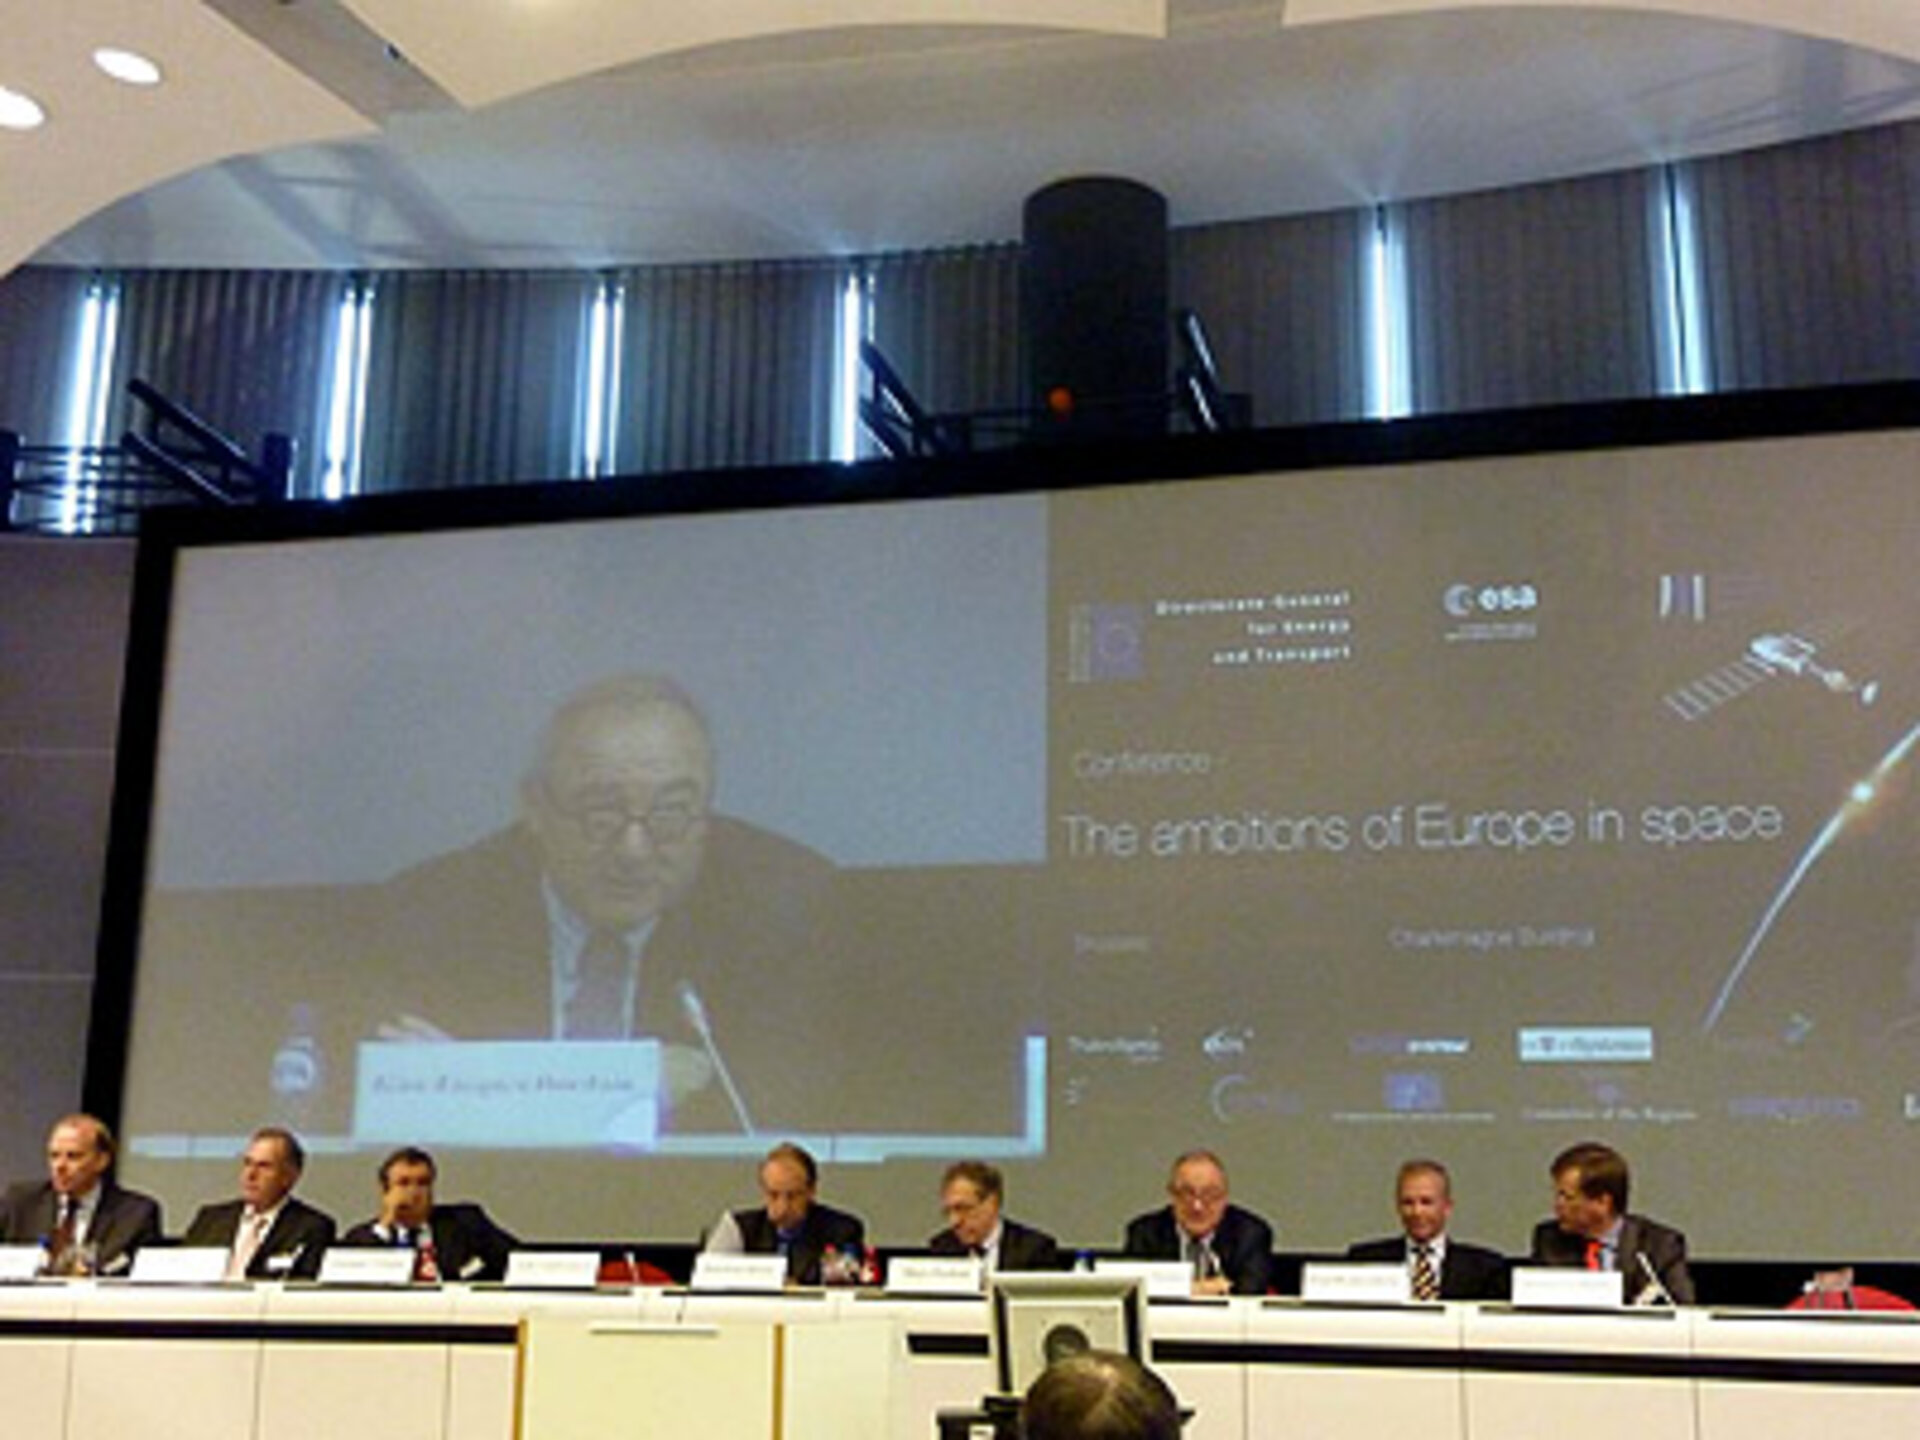 Director General Jean-Jacques Dordain (right) at the closing session